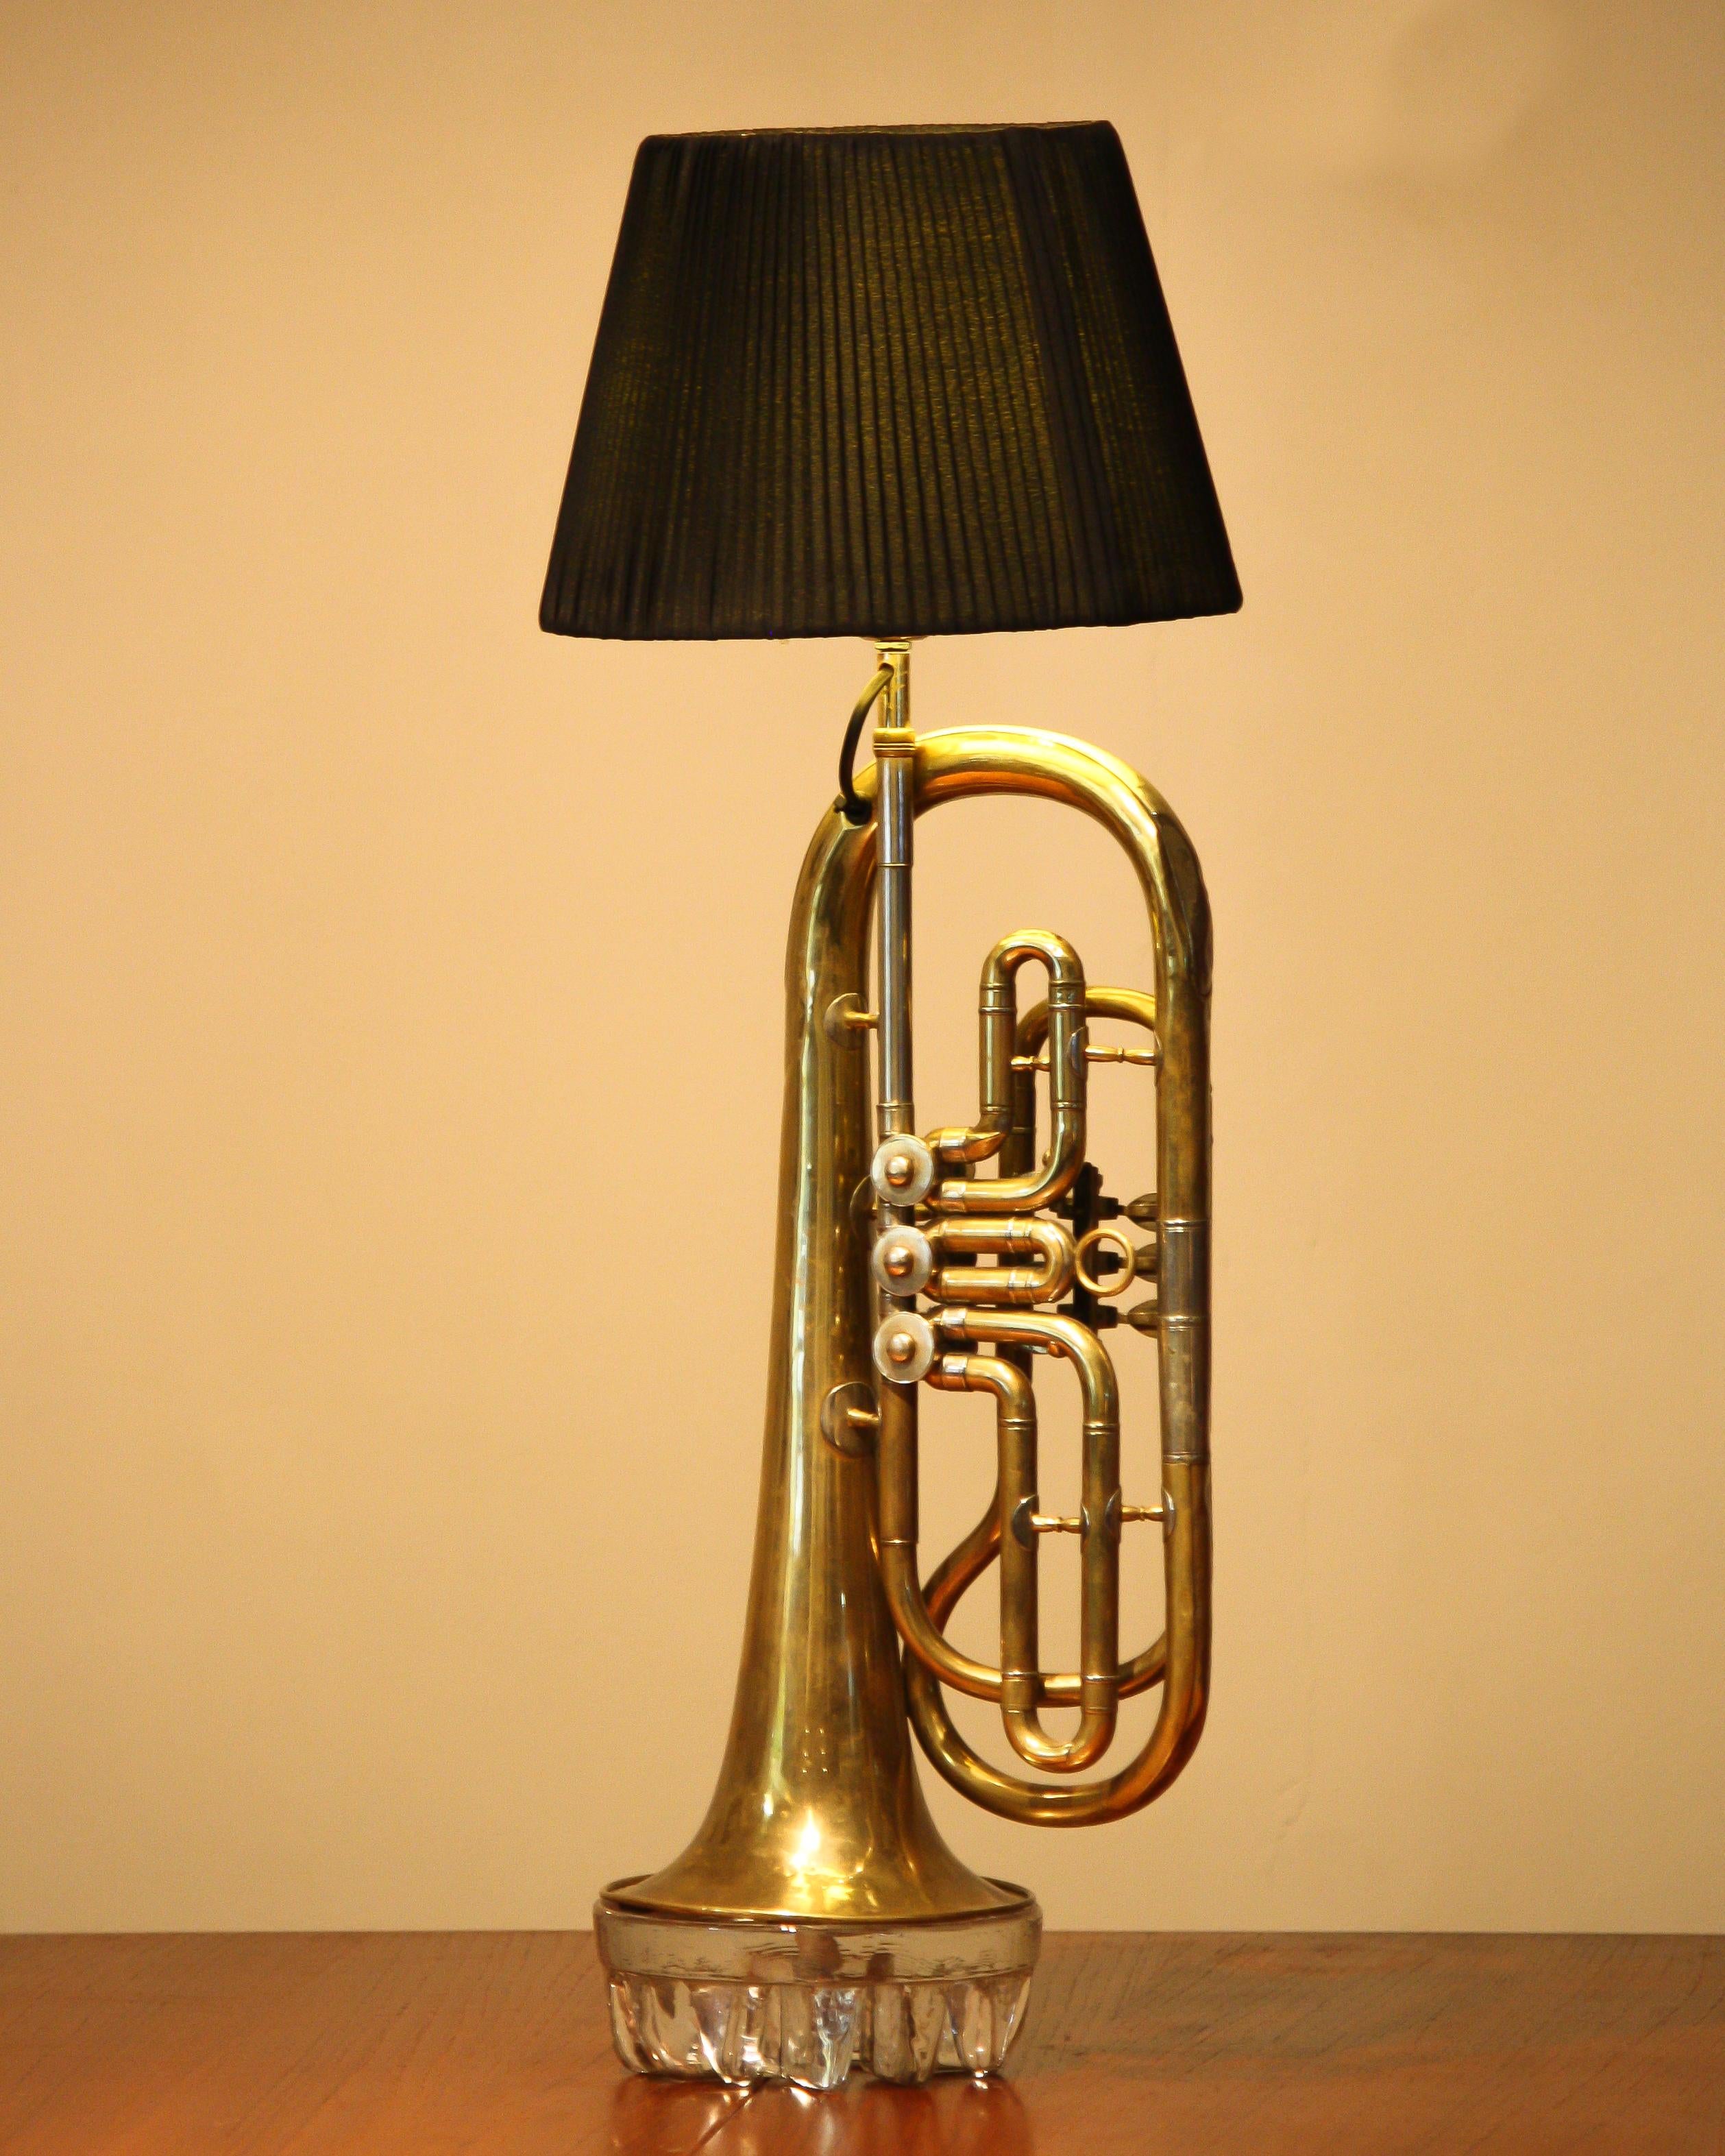 Brass Table Lamp Made of an American Cornet Flaps Trumpet from 1920s in Art Deco Style